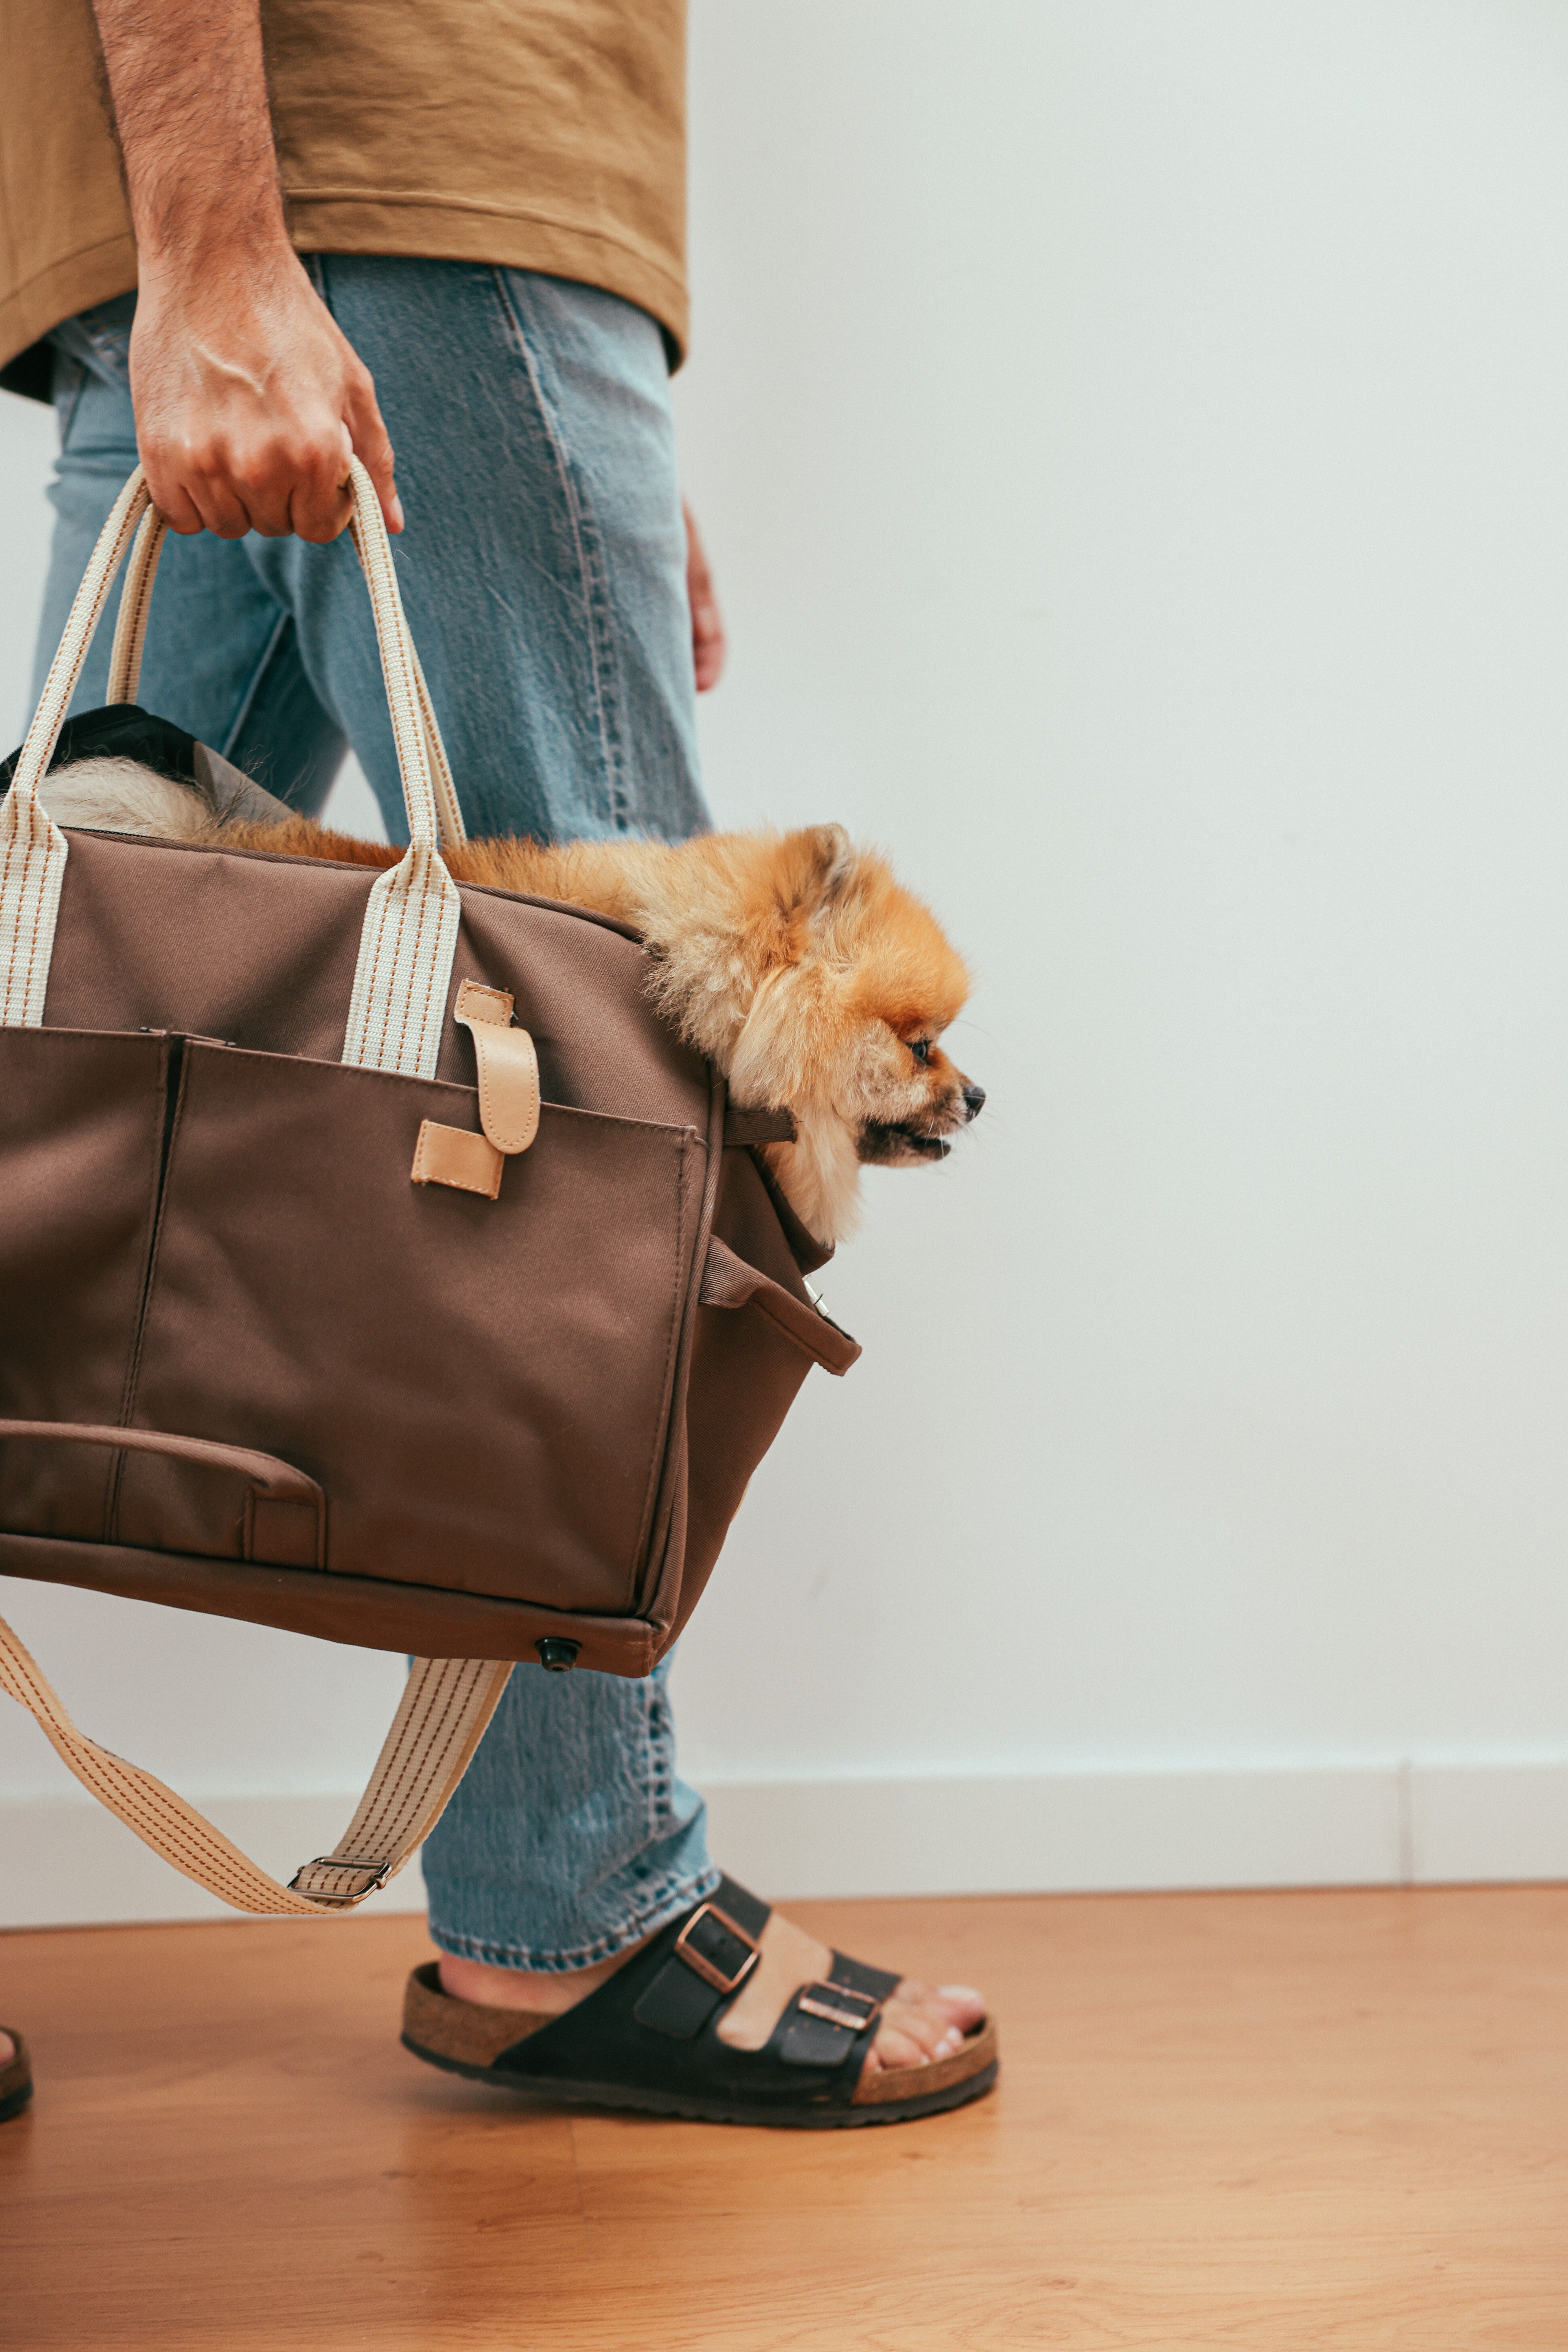 Jack revealed that inside his bag was a puppy. | Source: Pexels